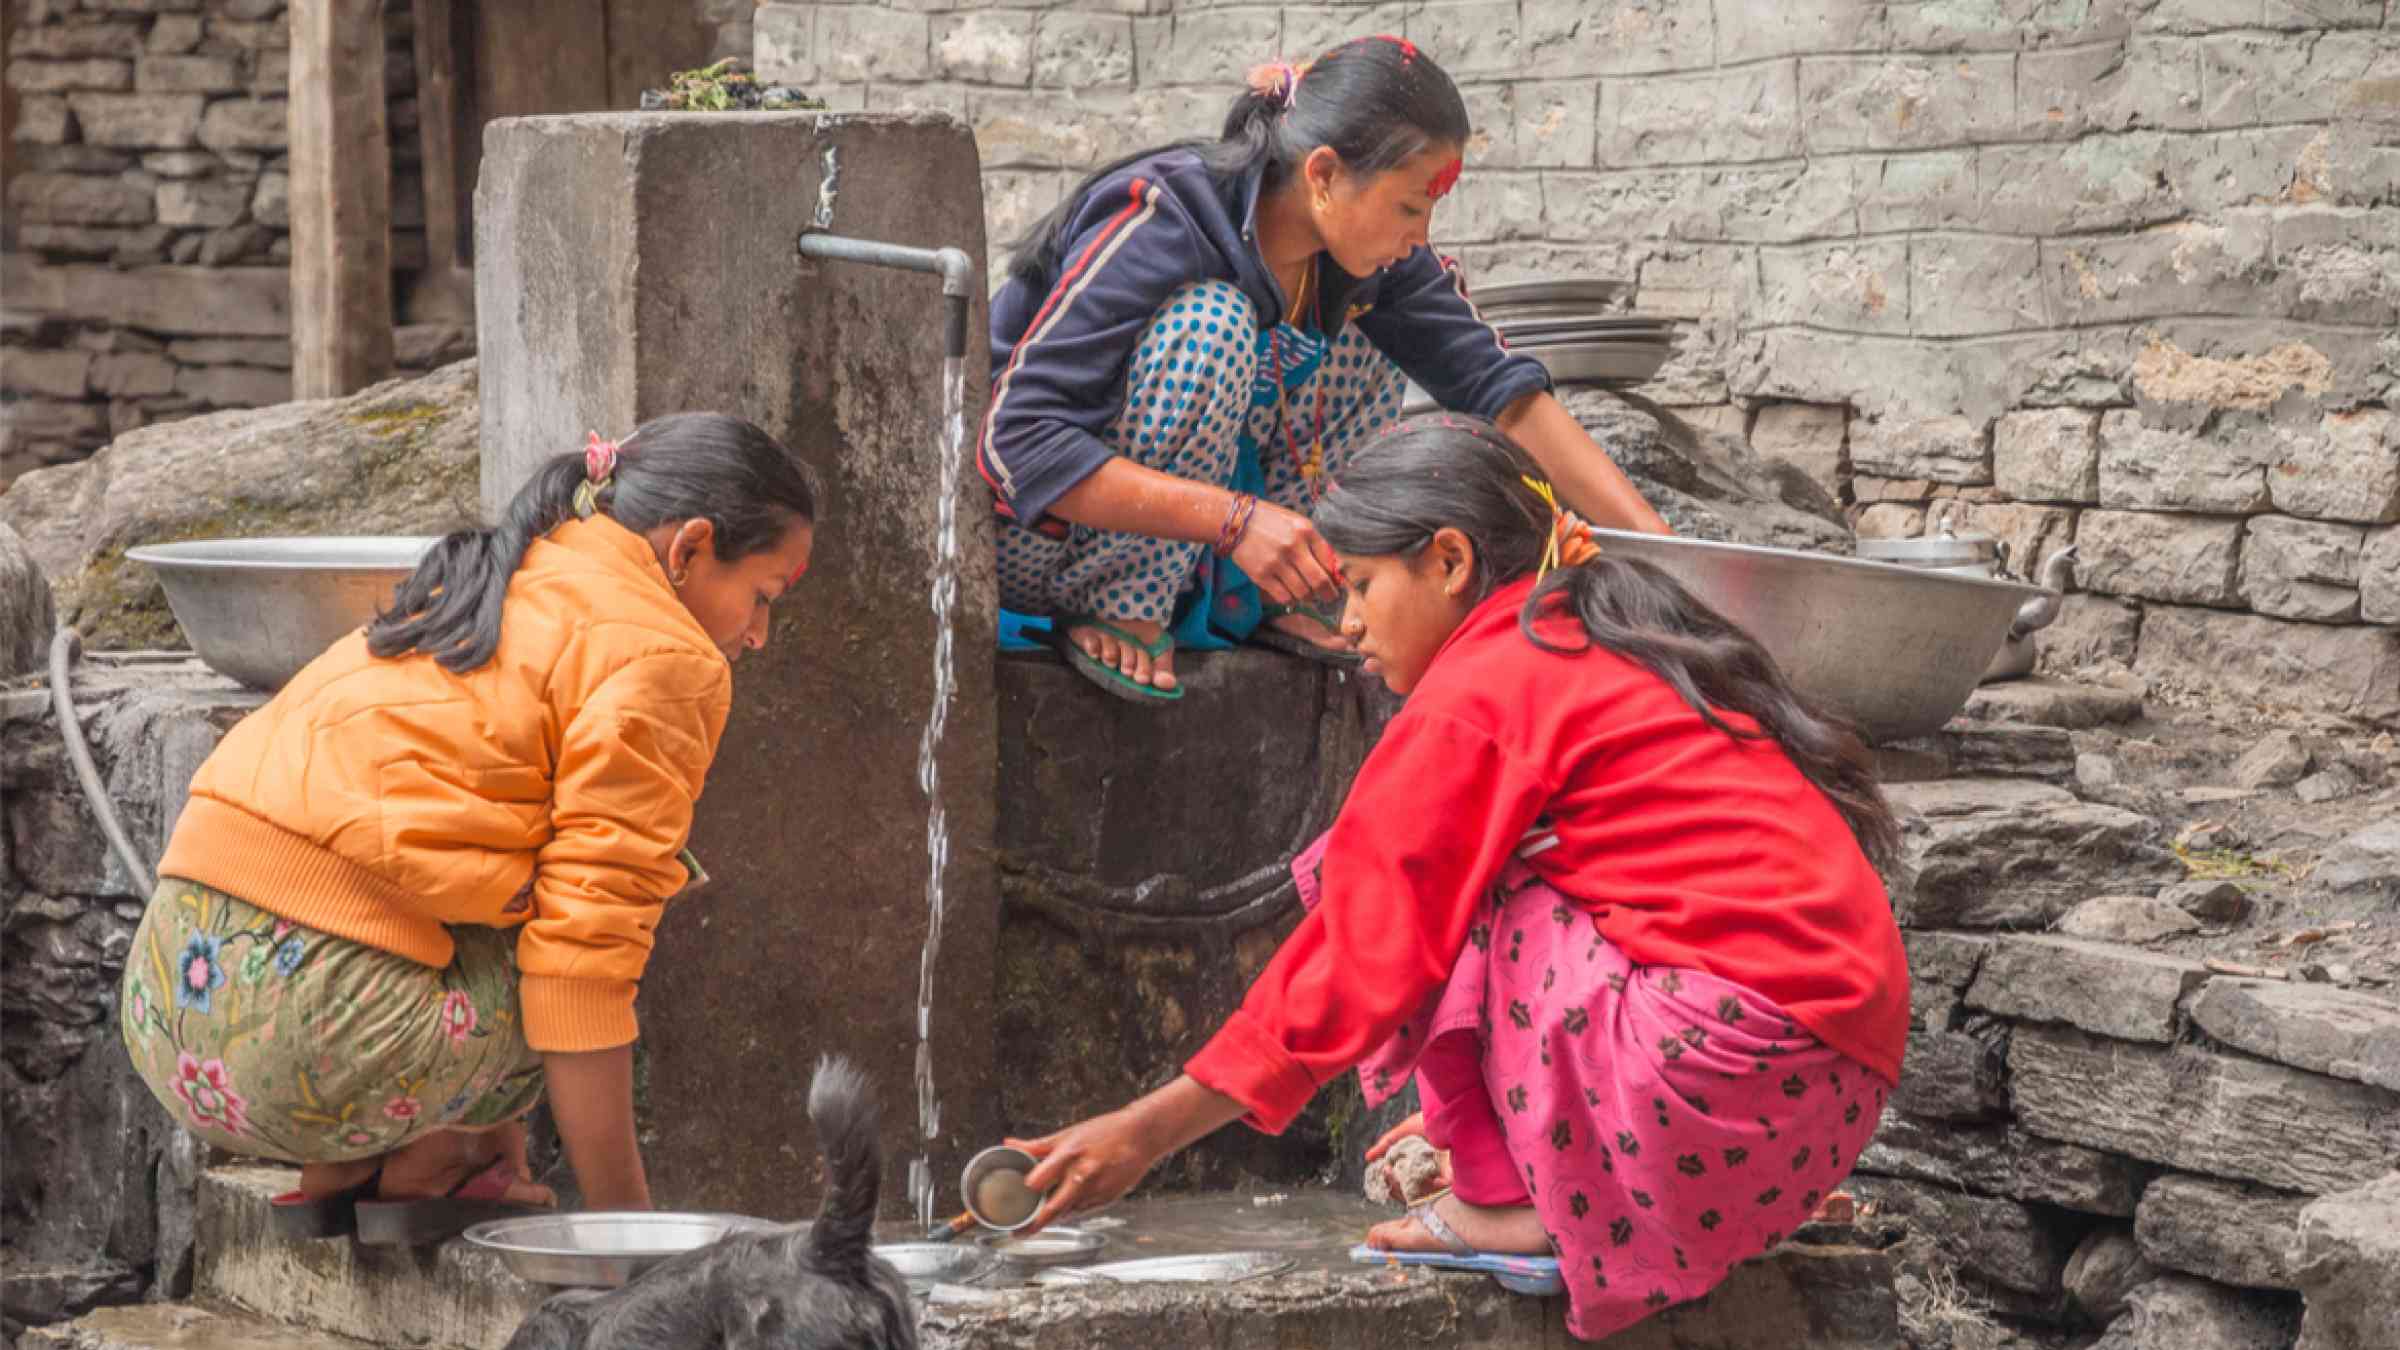 Two young women and a girl are busy washing dishes in the street of a village in Nepal